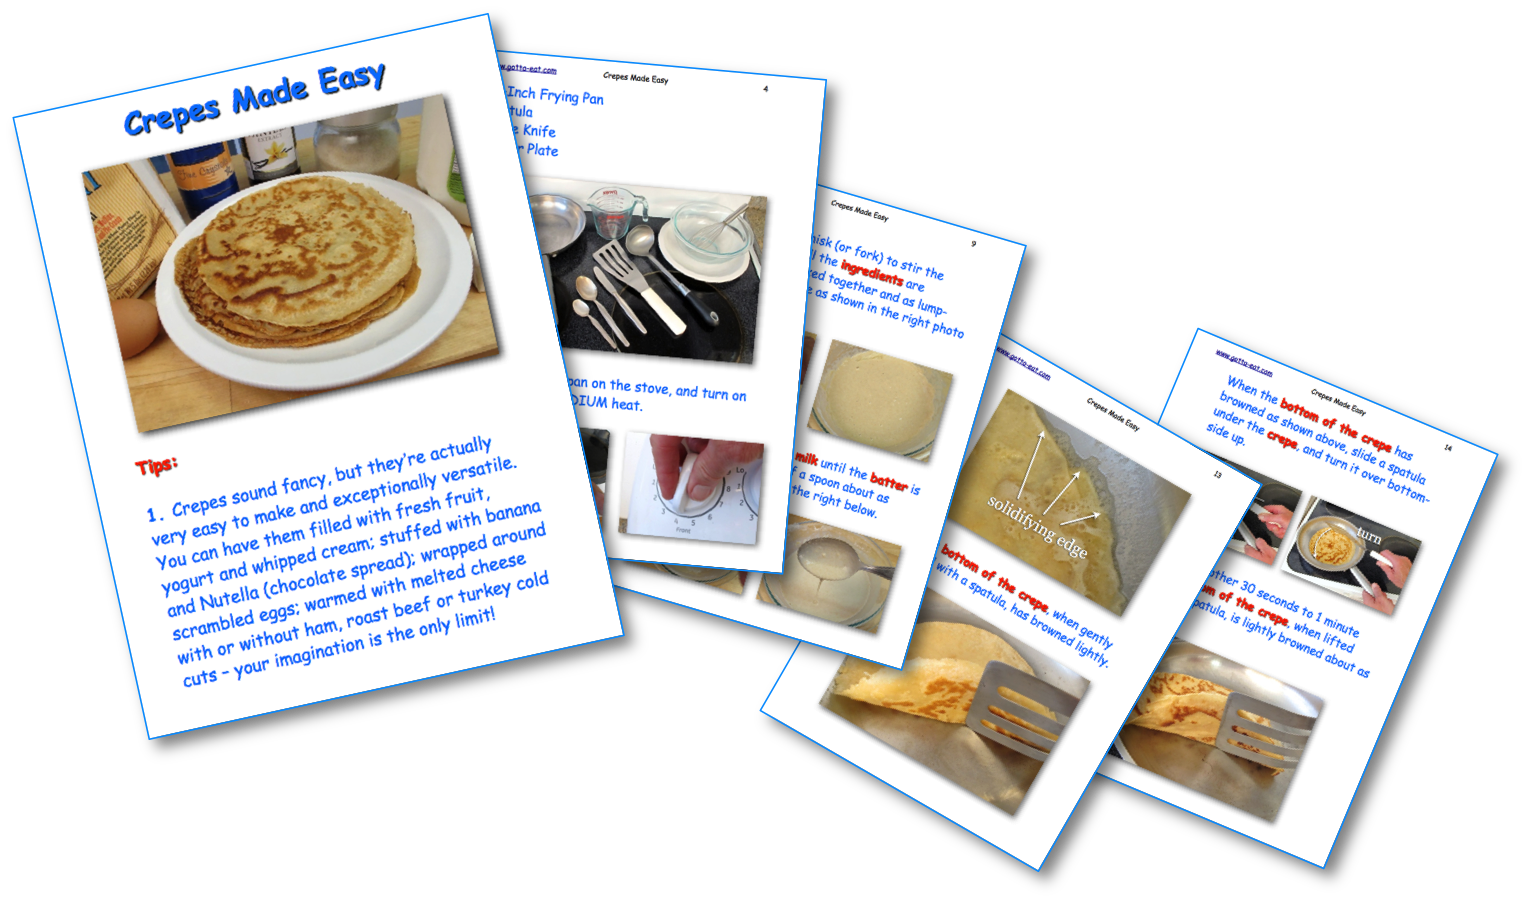 Crepes Made Easy Picture Book Recipe pages